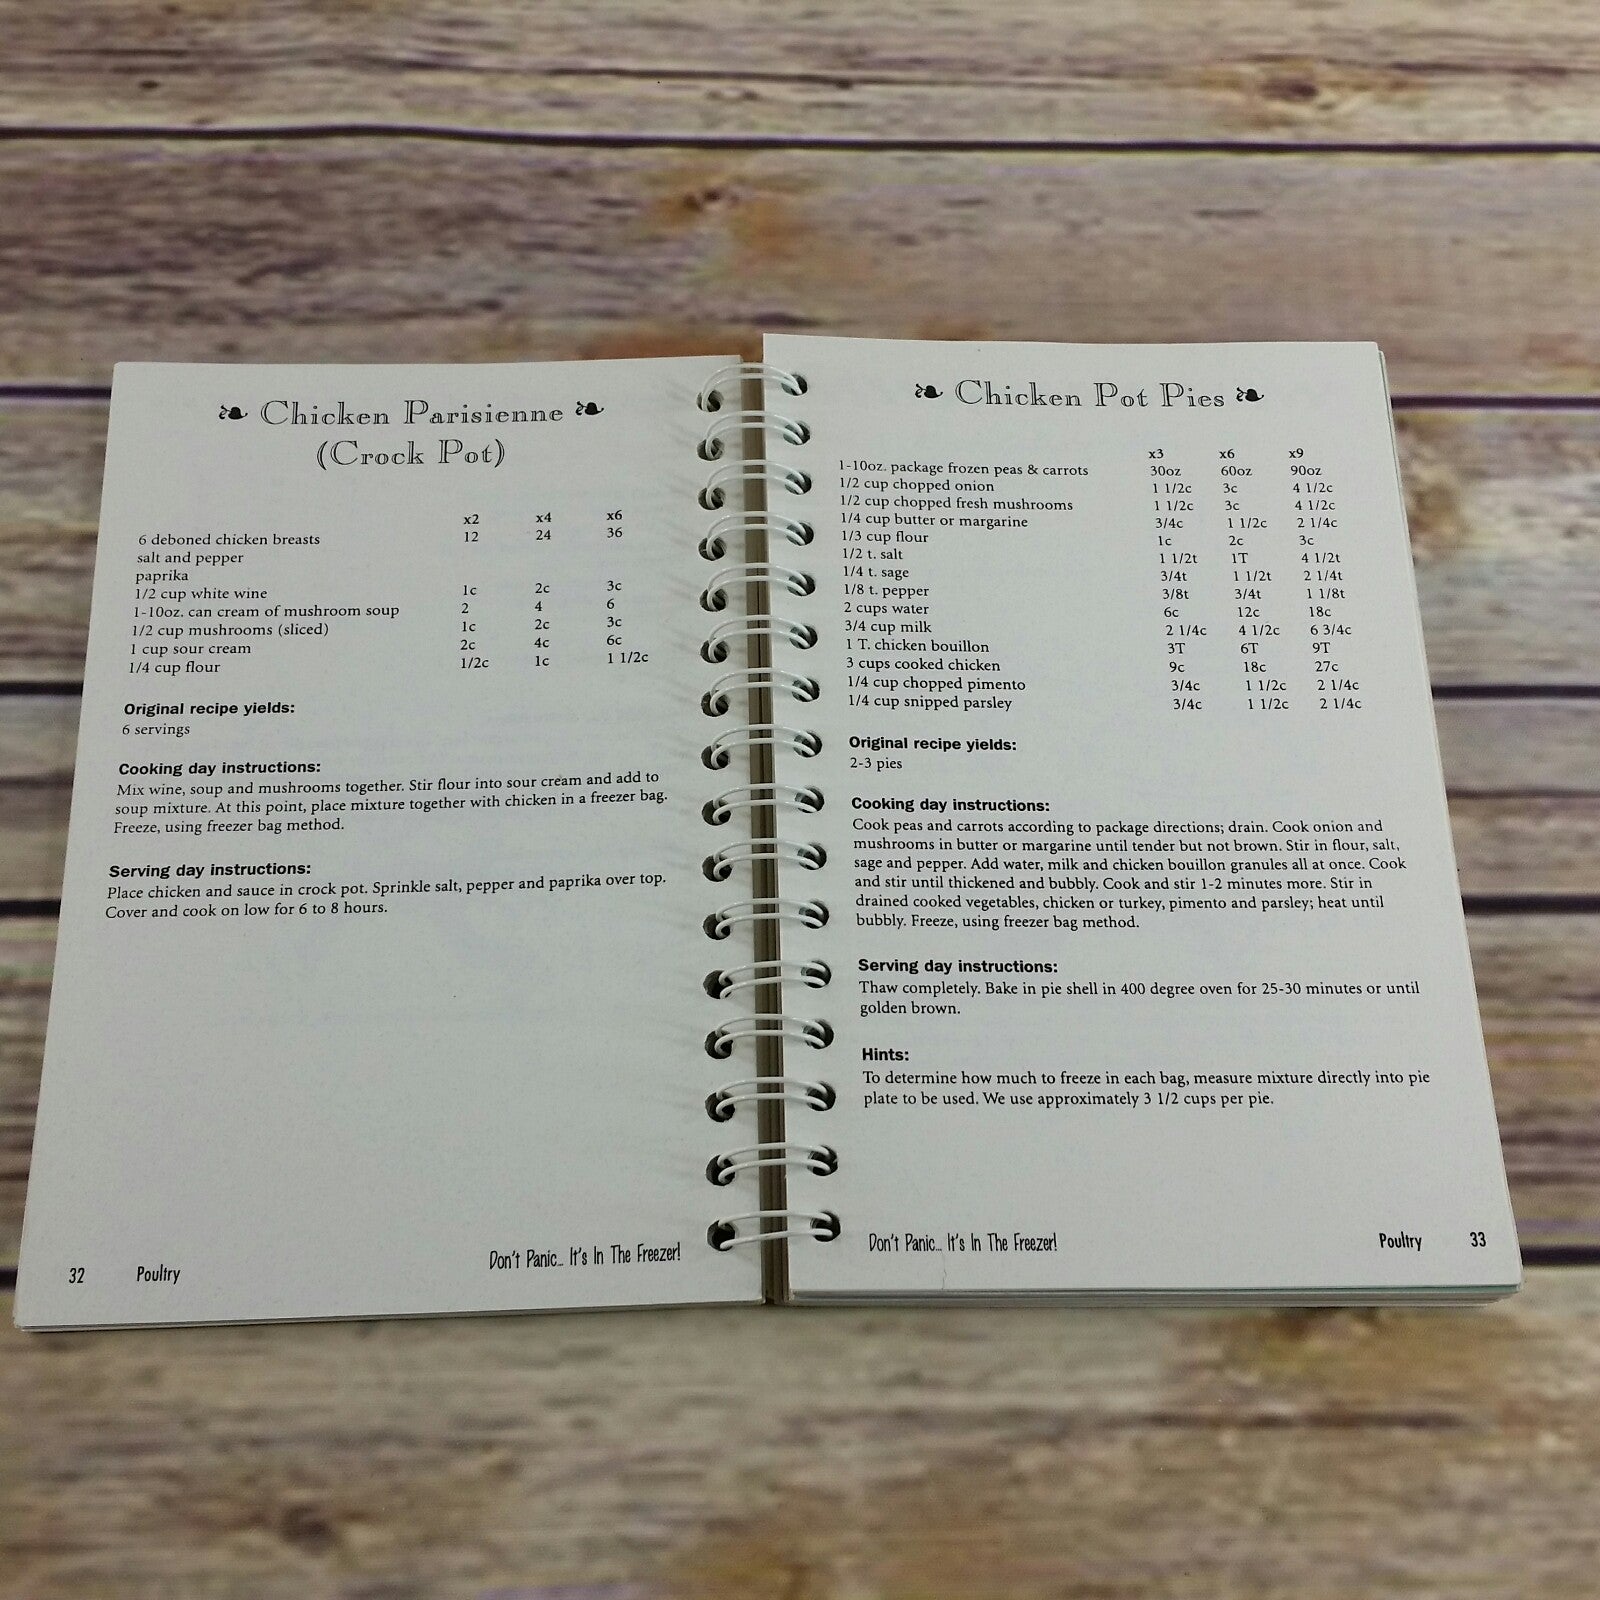 Vintage Cookbook Don't Panic It's In the Freezer Make Ahead Recipes Meal Prep 1997 Spiral Bound - At Grandma's Table